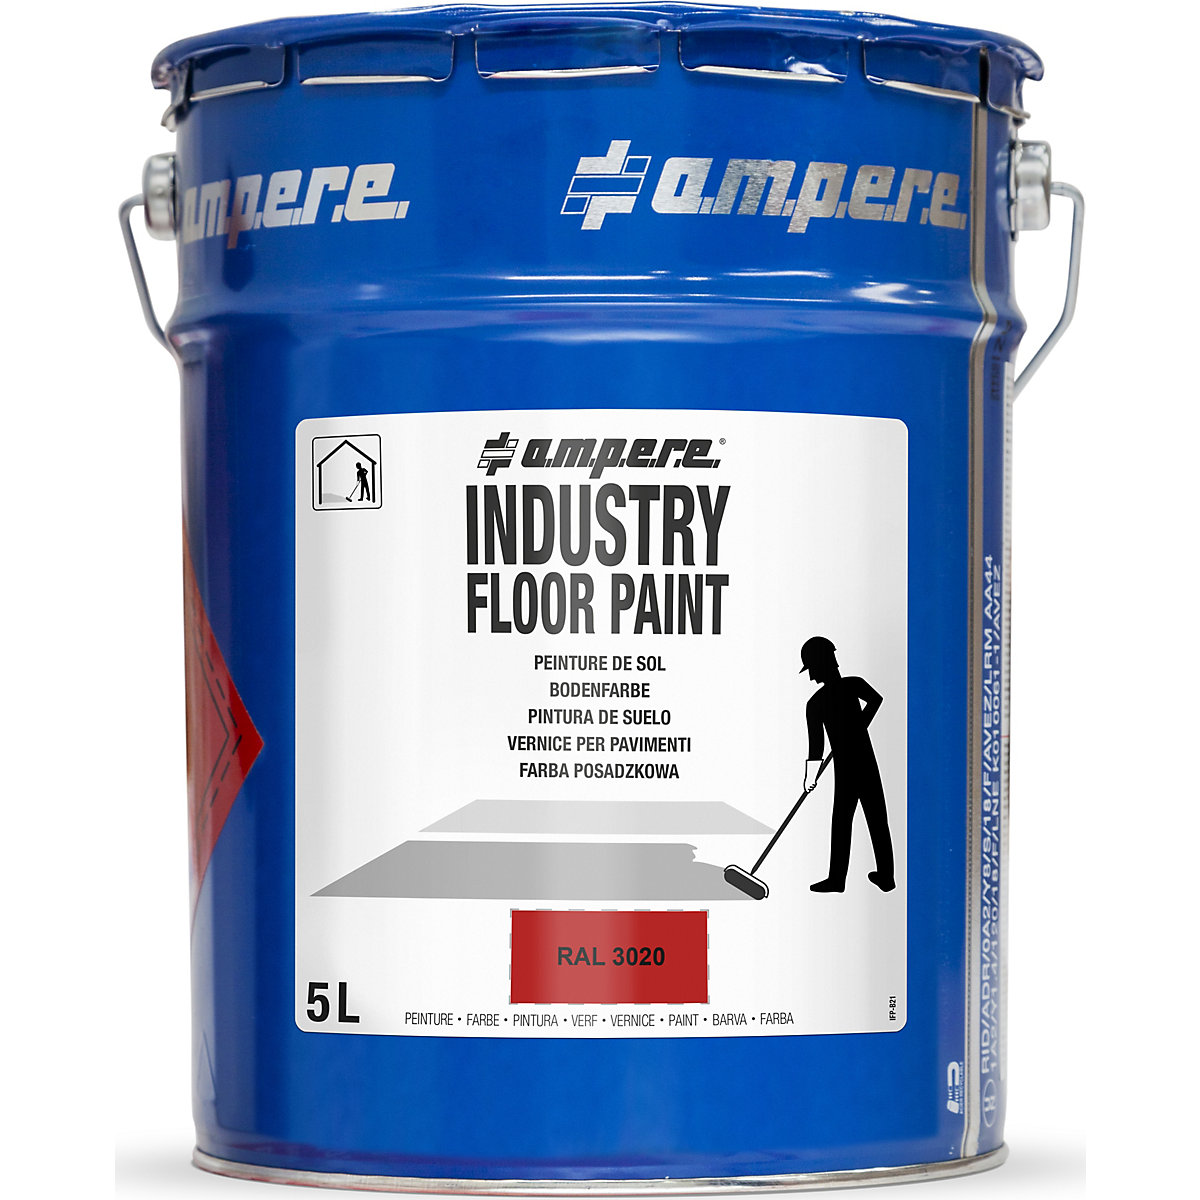 Industry Floor Paint® ground marking paint – Ampere, capacity 5 l, red-3